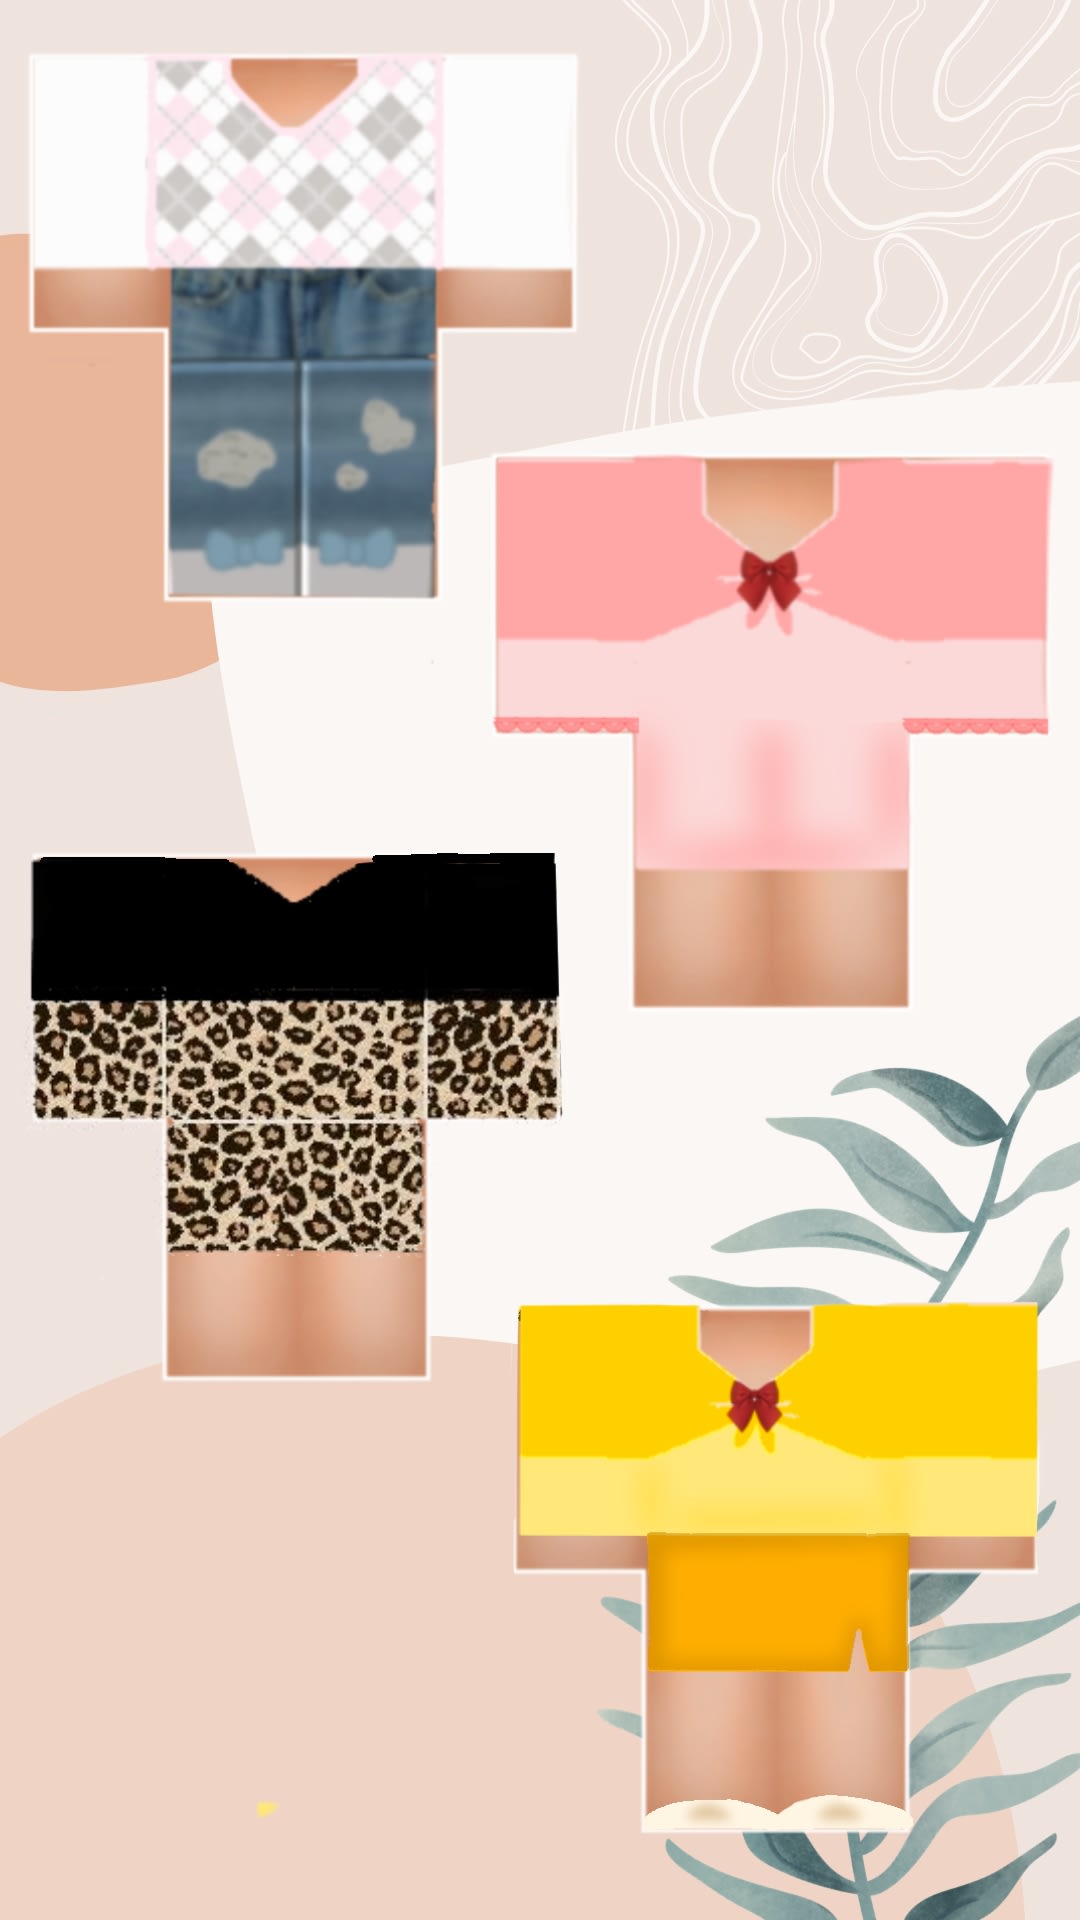 how to make aesthetic shirt in roblox